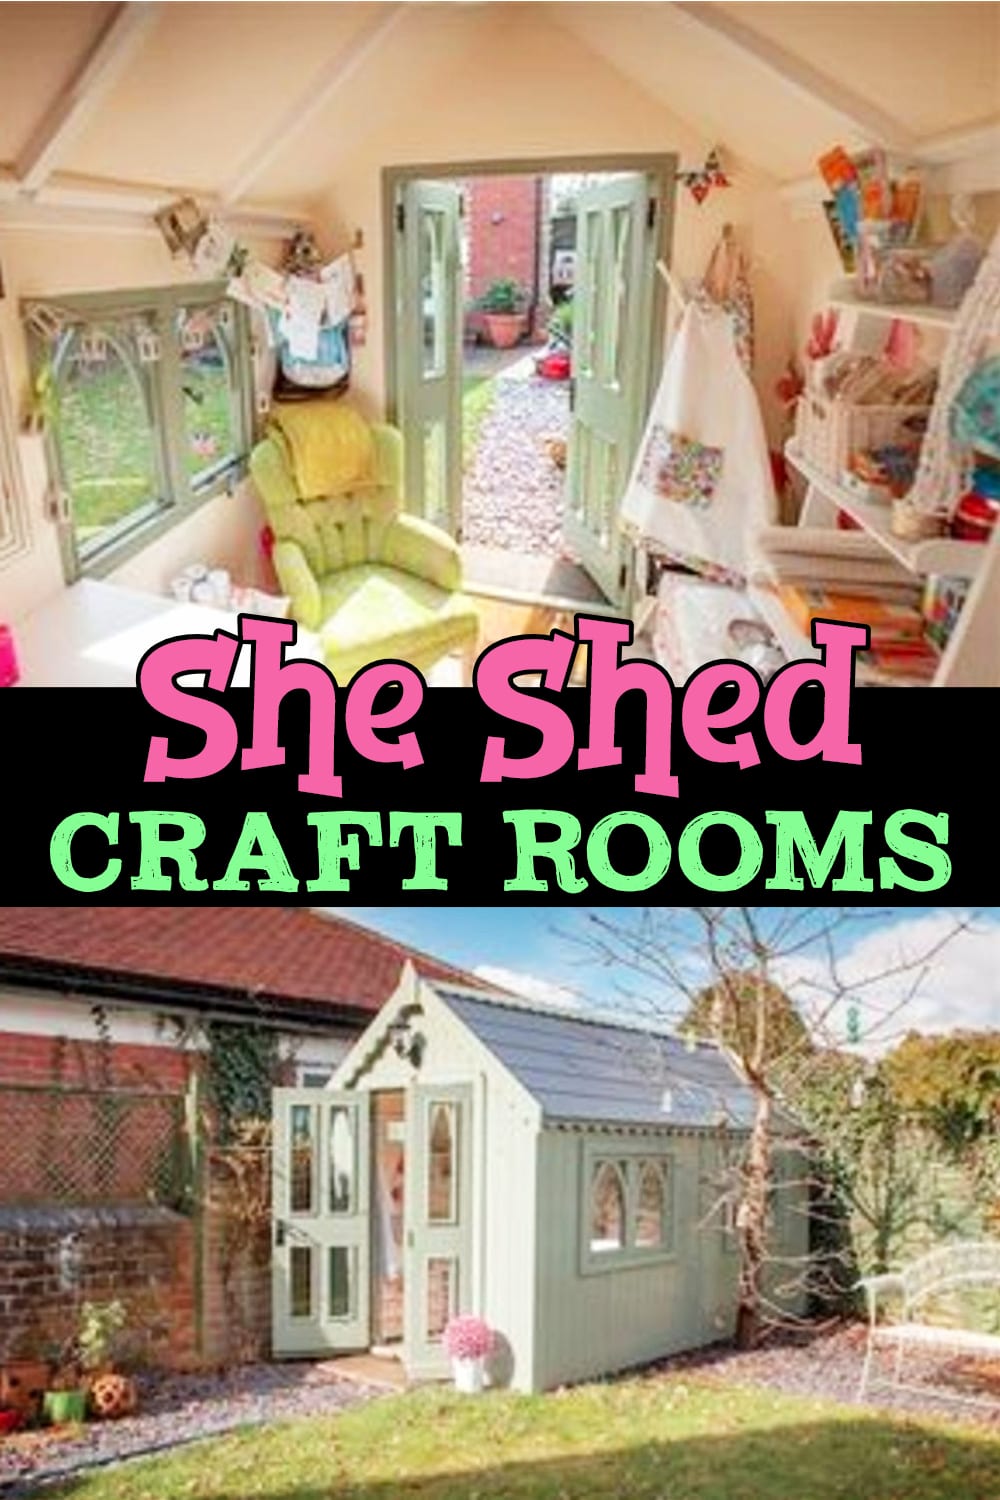 She Shed Ideas - Beautiful She Shed Ideas for a Backyard Retreat, Home Office or Craft Room - she sheds on a budget including she shed ideas interior - she shed ideas woman cave - She Shed Craft Room Ideas as well as she shed ideas interior craft rooms - beautiful DIY Backyard shed craft room ideas and shed office ideas! She Shed Pics, Images and Designs For The Perfect She Shed (or HE shed) - She Shed Cottage Office Ideas Pictures too!